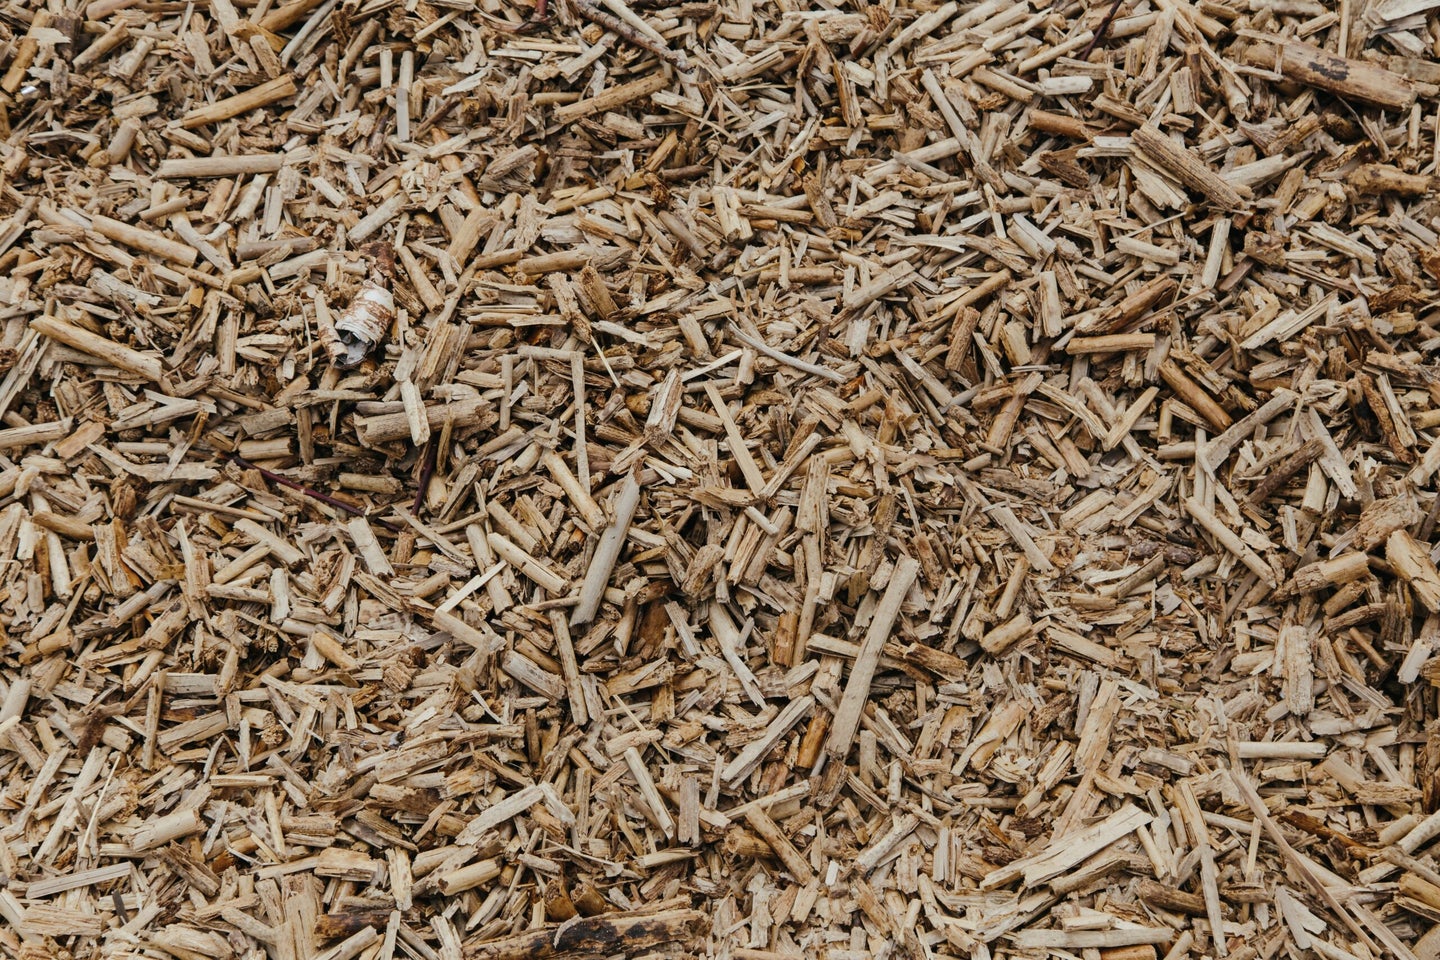 Biomass supply and availability ultimately depend on the climate. 
